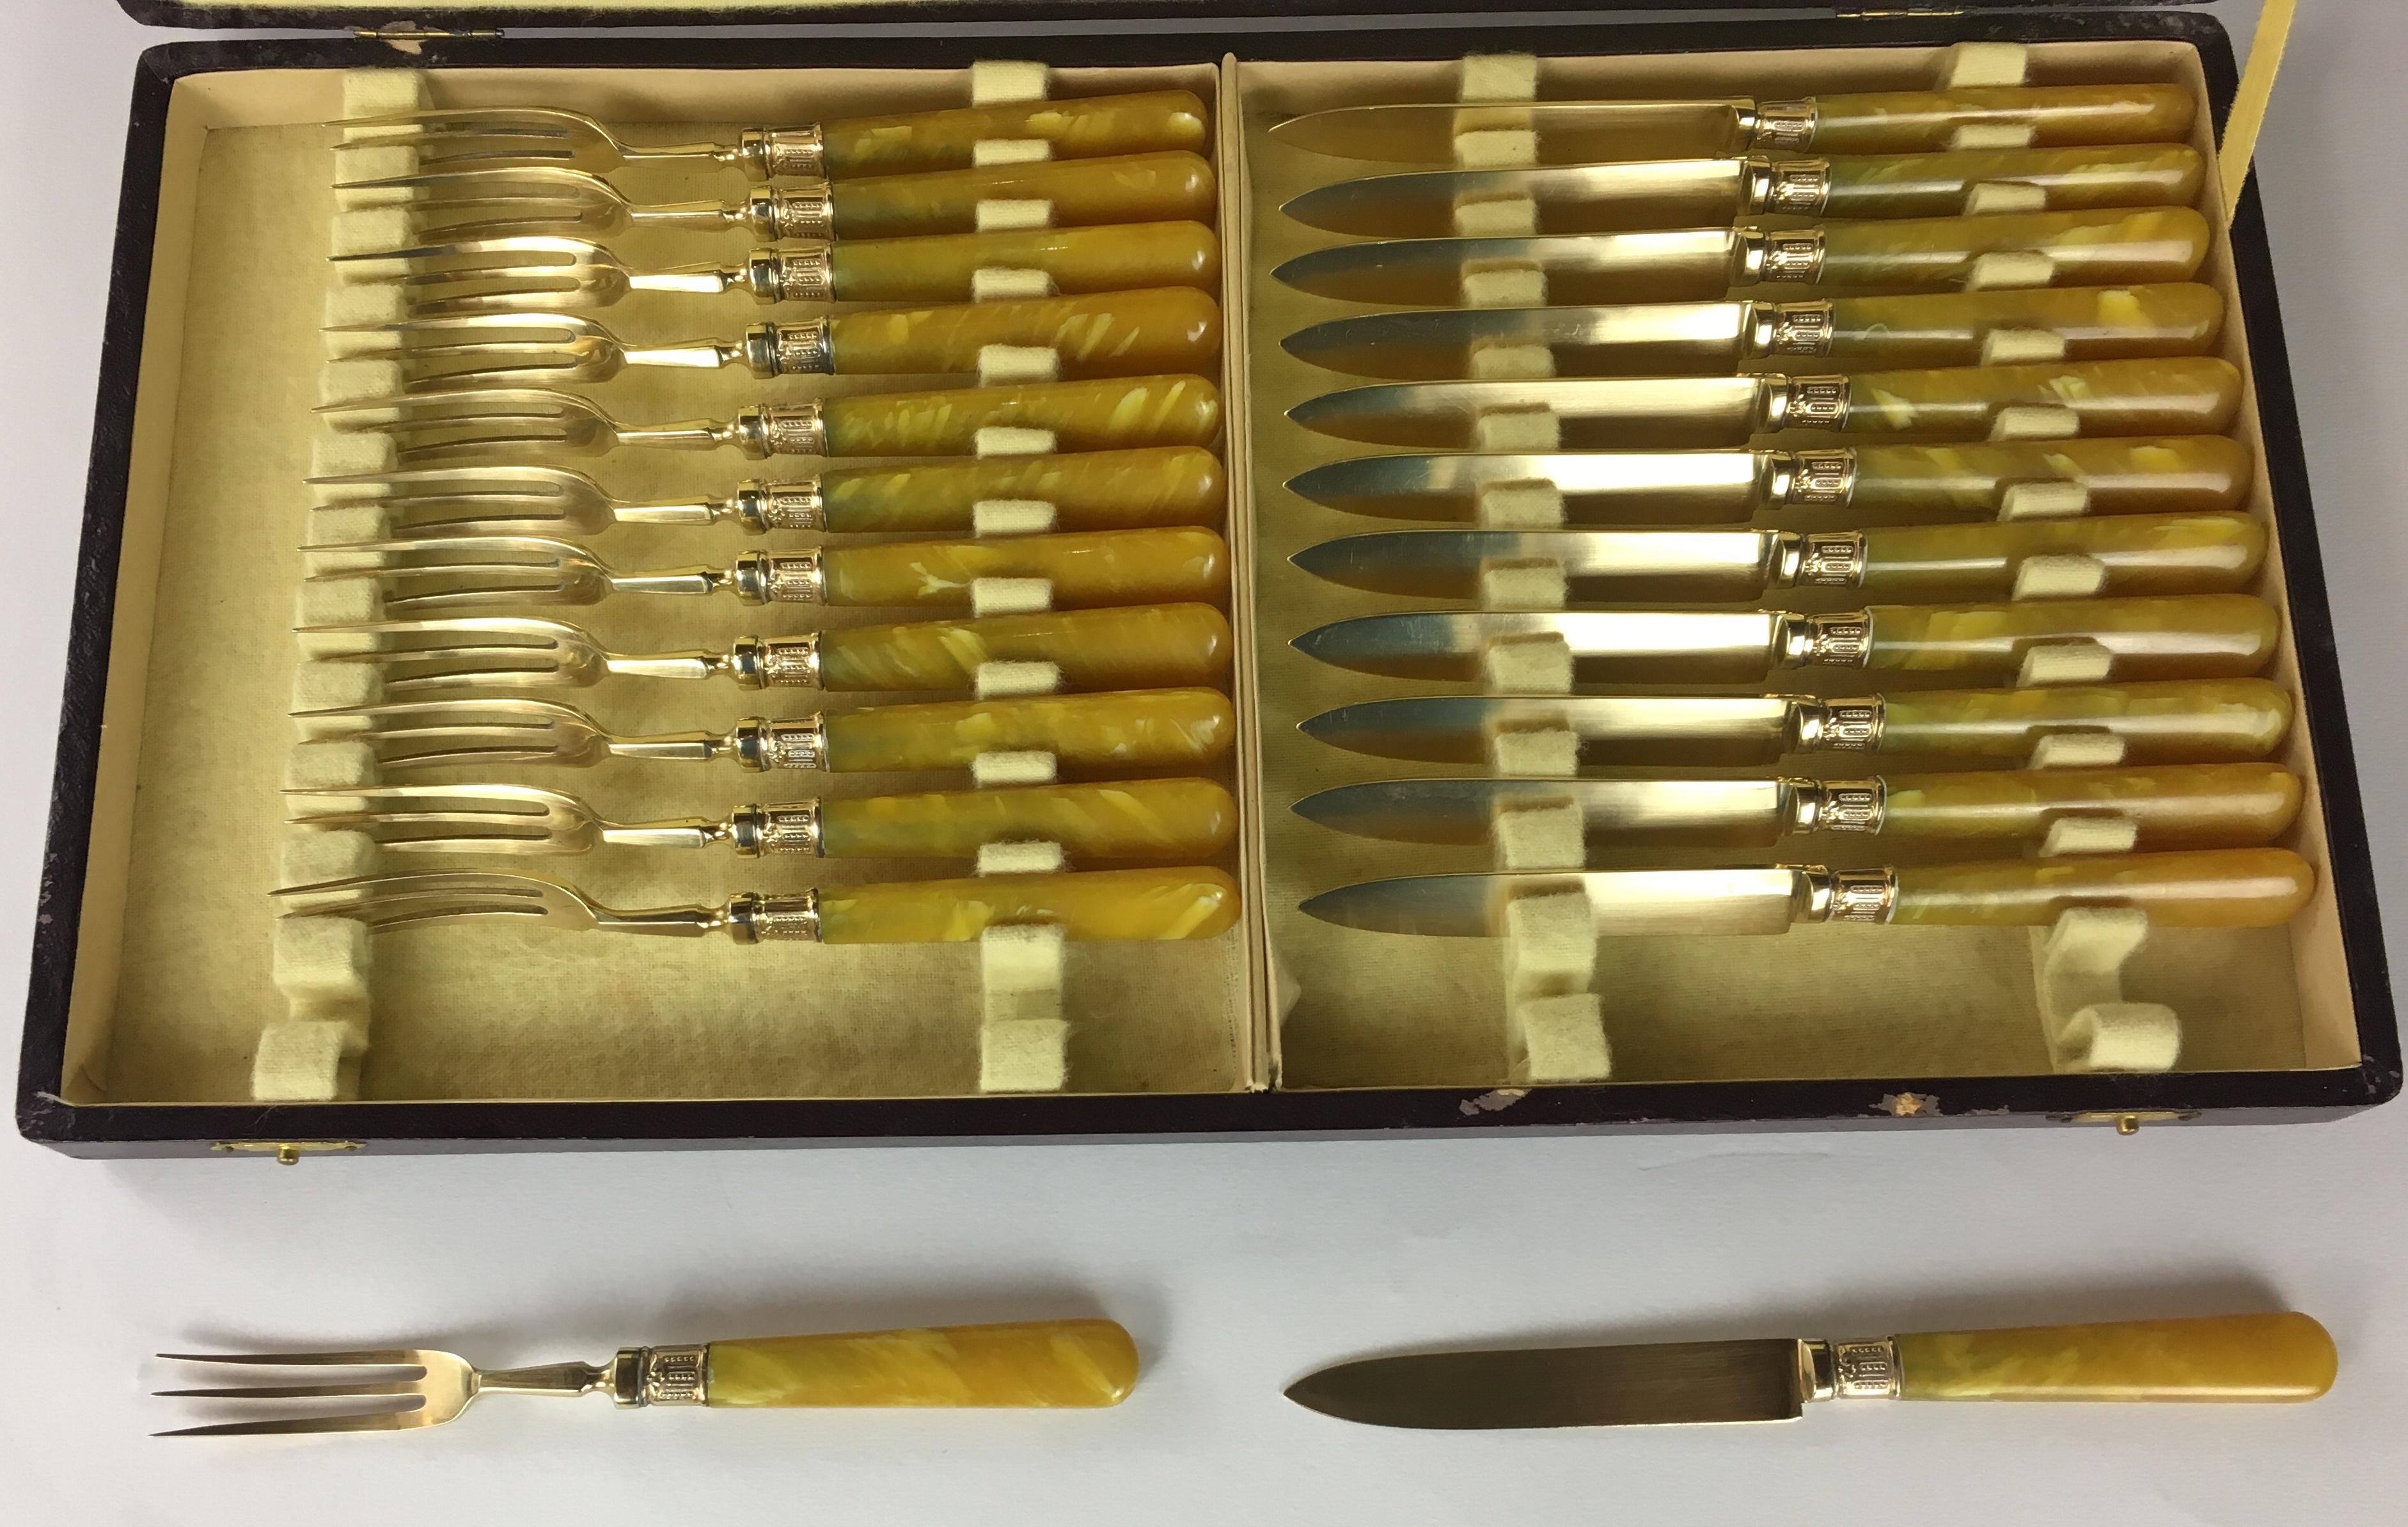 The pricing applies to the entire set of 36 French gold-plated oyster forks set twelve pieces, dessert forks and knives twenty four pieces. All with mother-of-pearl handles and gold plated ferrules. This complete set is sold with their original box